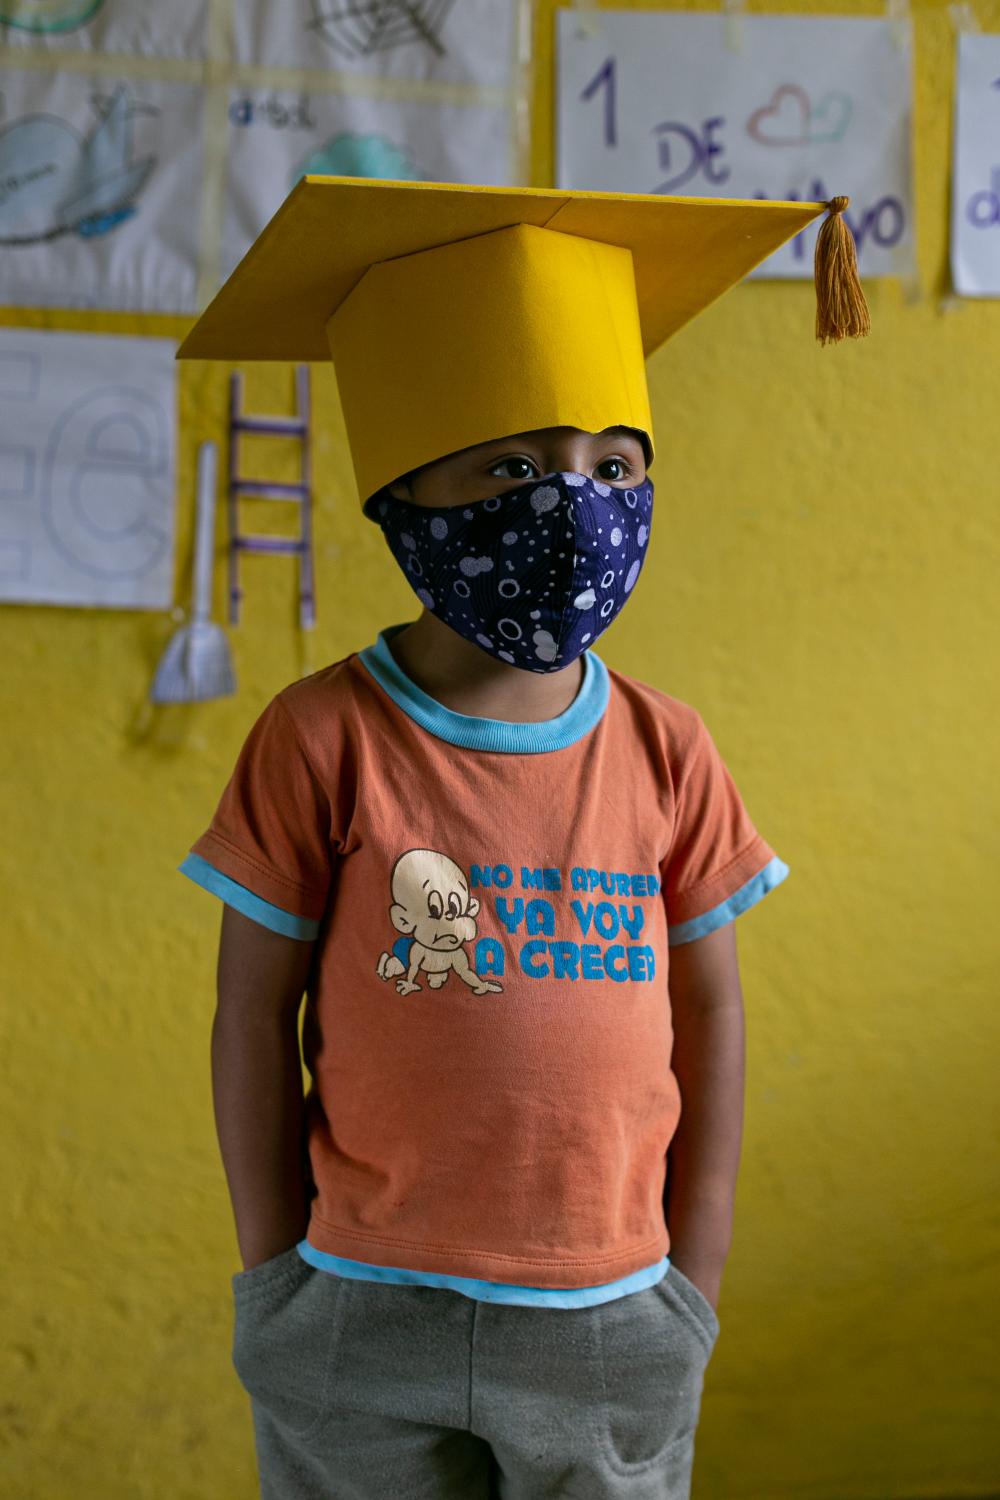 Gael Pin (4) wears the cap and mask he will use at the closing ceremony of the school year, which will be done via video conference. Gael&#39;s family doesn&#39;t have internet service because of money but fortunately his neighbor has that service and shares it with them. June 18, 2020. Cotogchoa-Ecuador. Andr&eacute;s Y&eacute;pez.